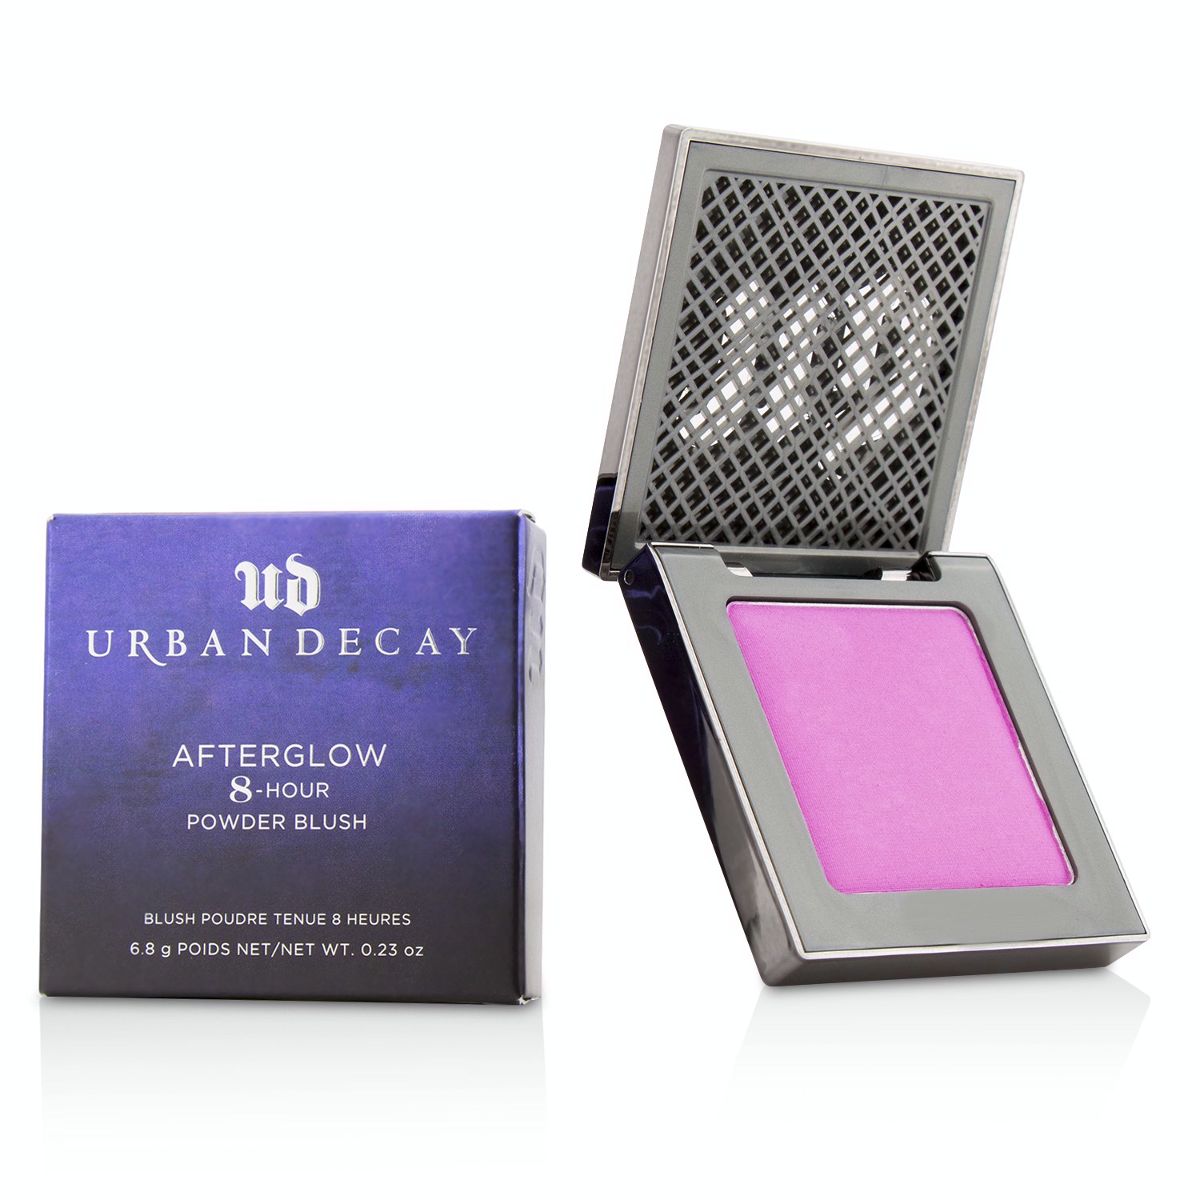 Afterglow 8 Hour Powder Blush - Quickie (Blue-based) Urban Decay Image